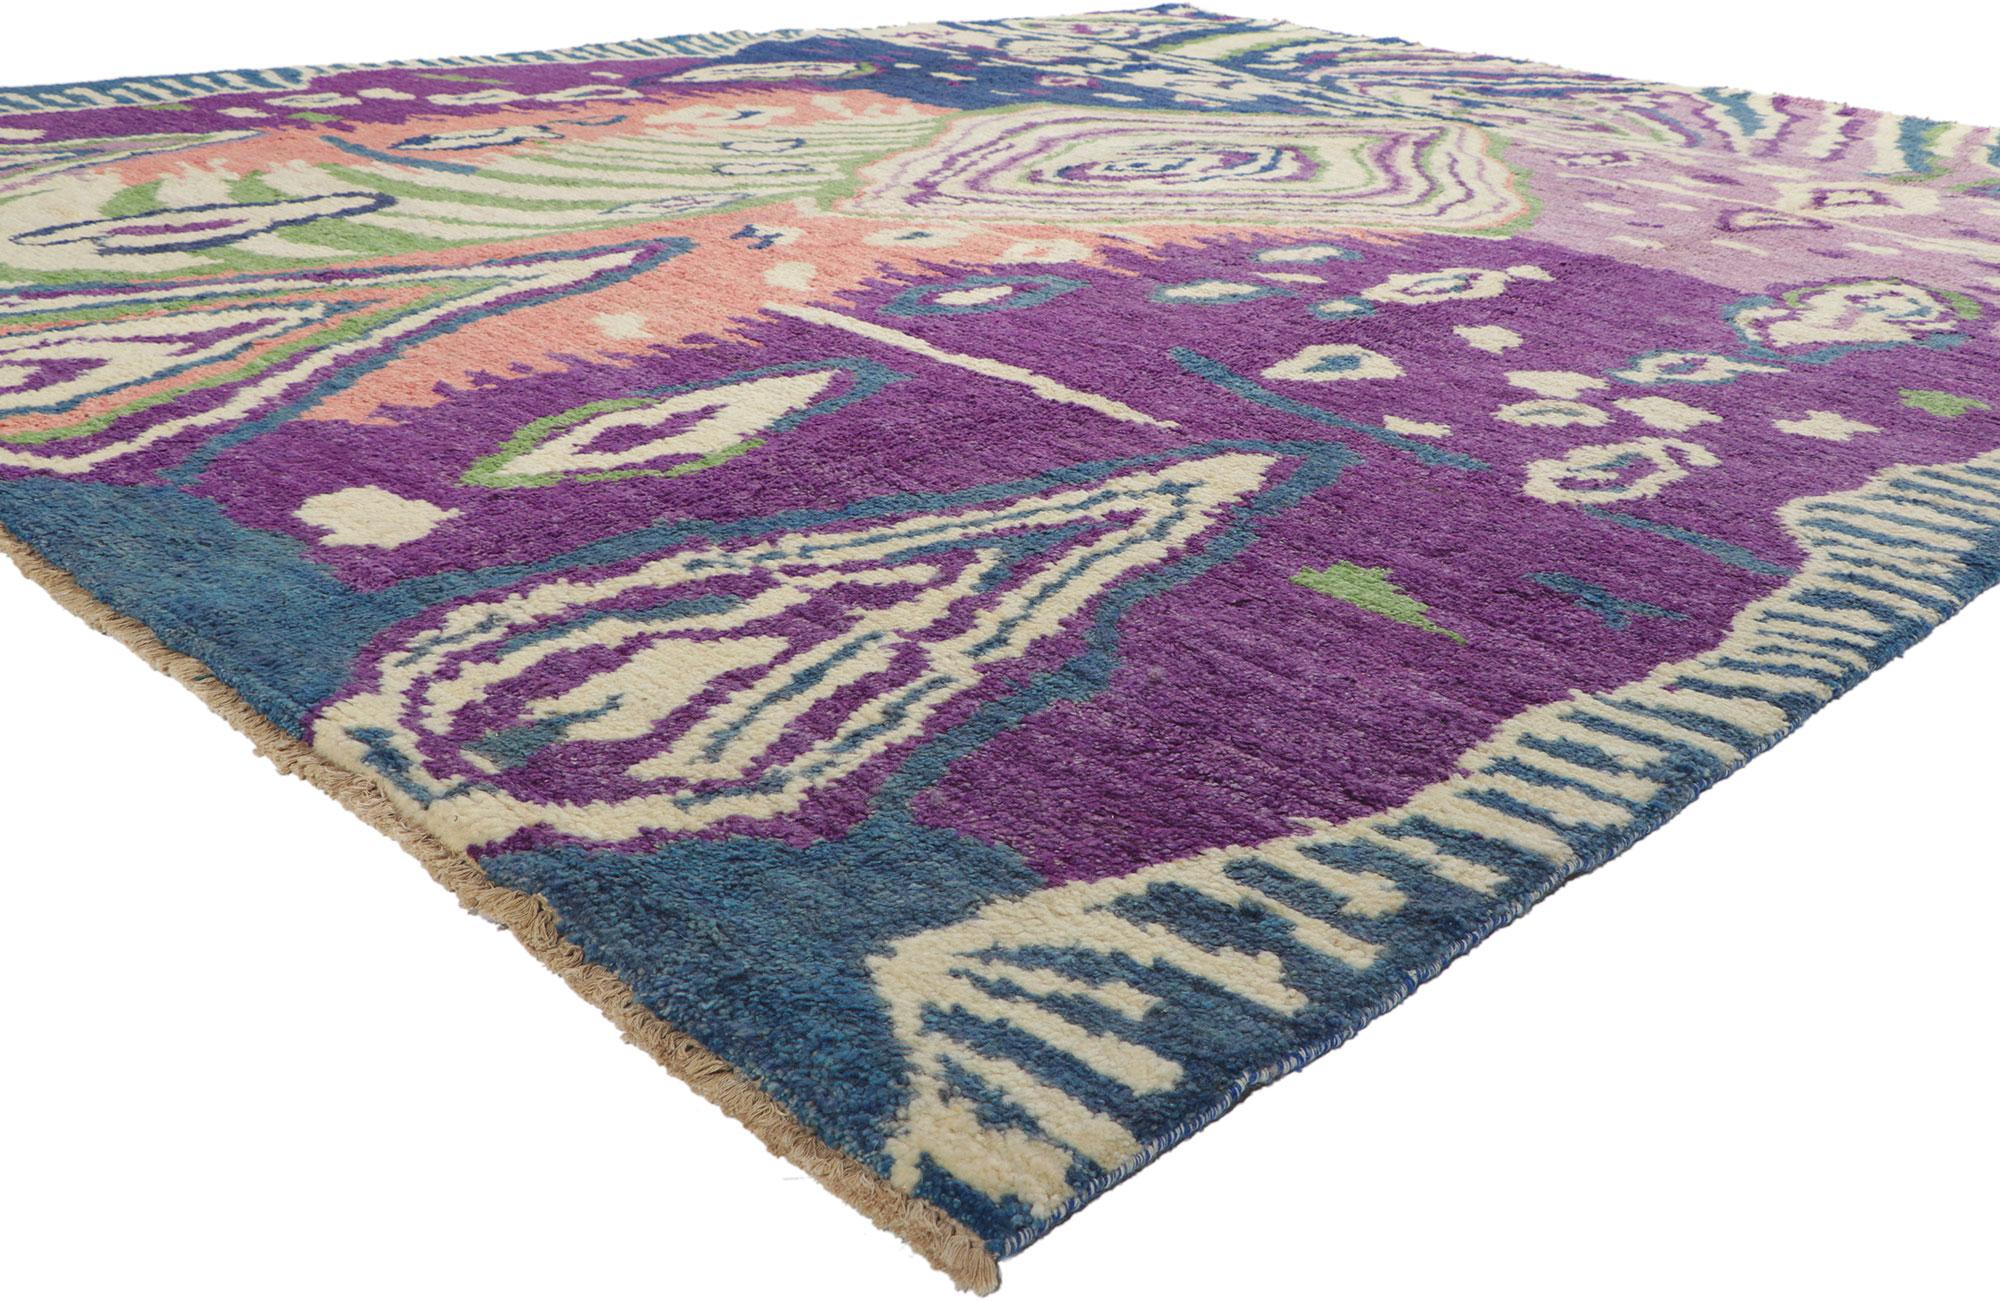 80350 New Moroccan Area Rug, 10'05 x 13'02.
Reflecting esoteric elements with incredible detail and texture, this hand knotted wool colorful Moroccan rug is a captivating vision of woven beauty. The avant-garde design and dramatic colorway woven